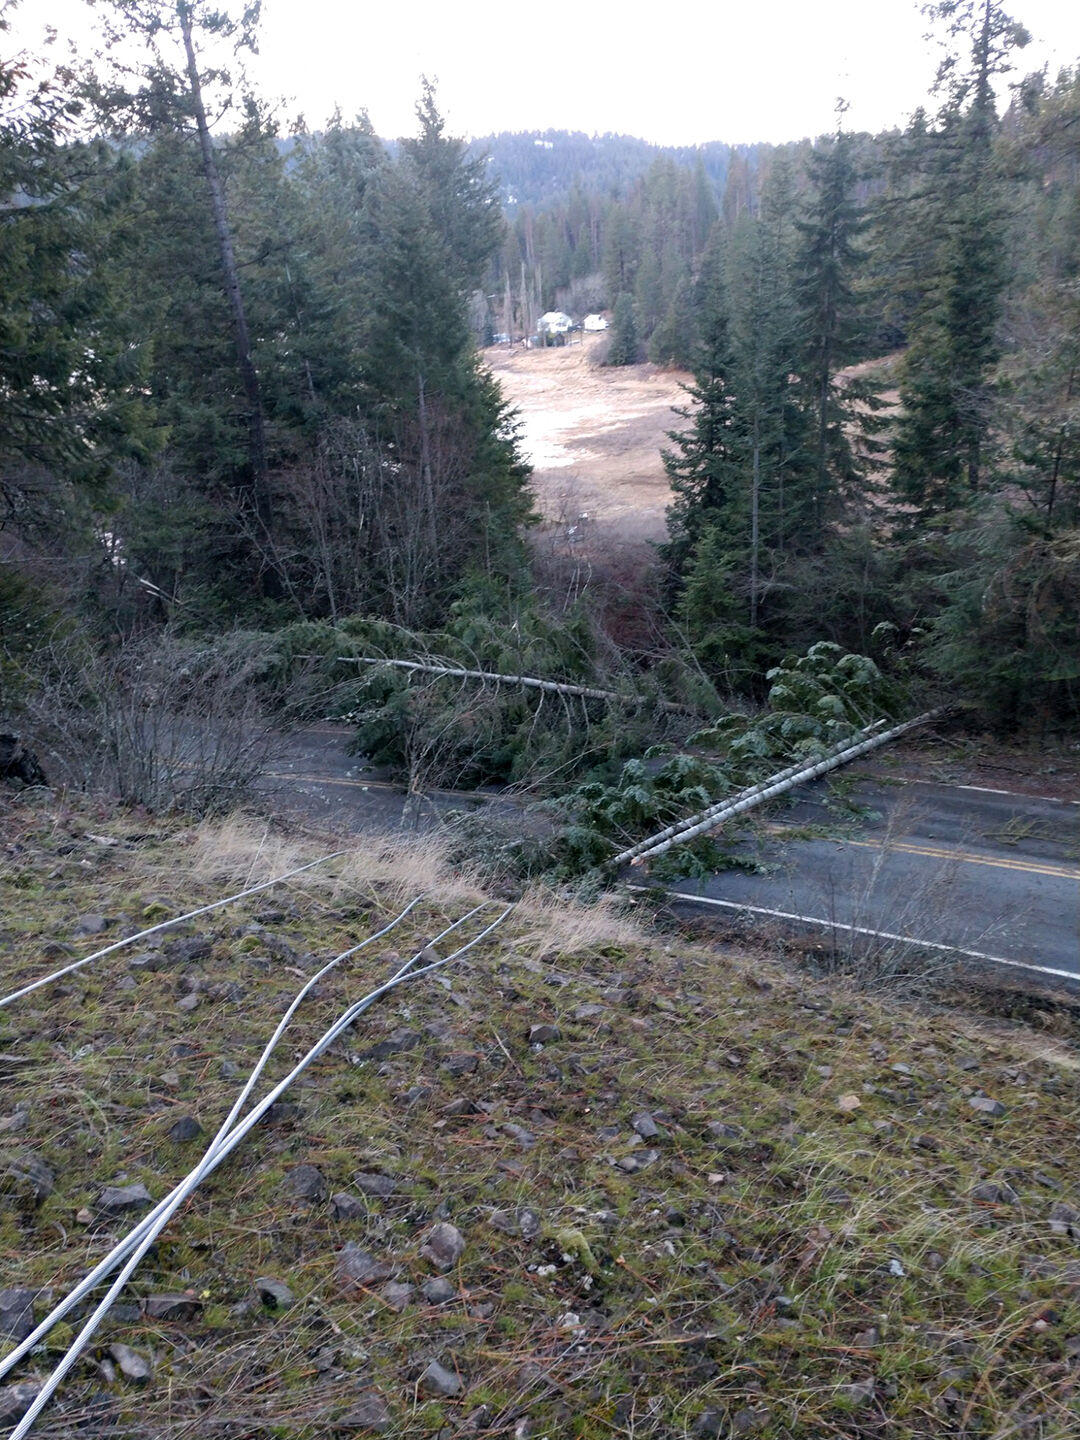 kootenai-electric-facing-44-separate-outages-11-crews-working-to